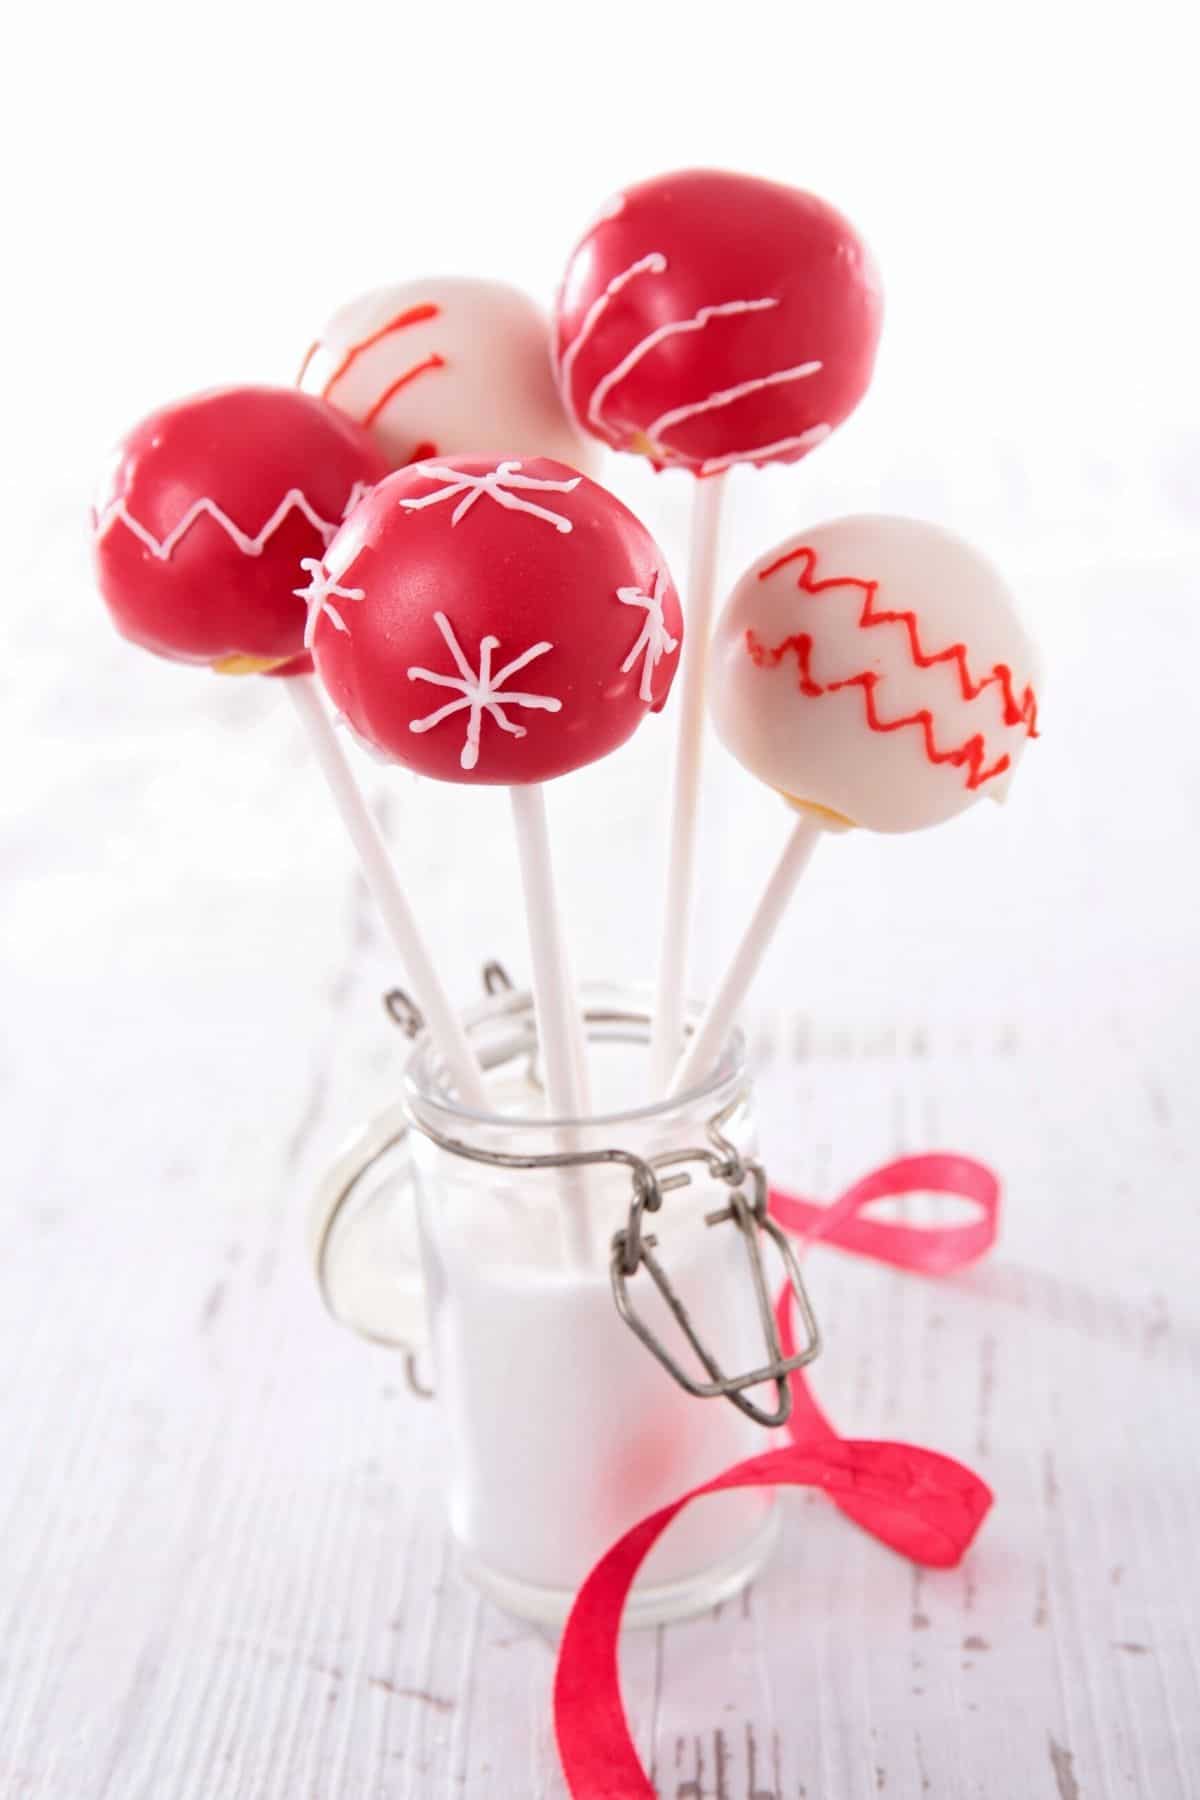 Red and white decorated cake pops.